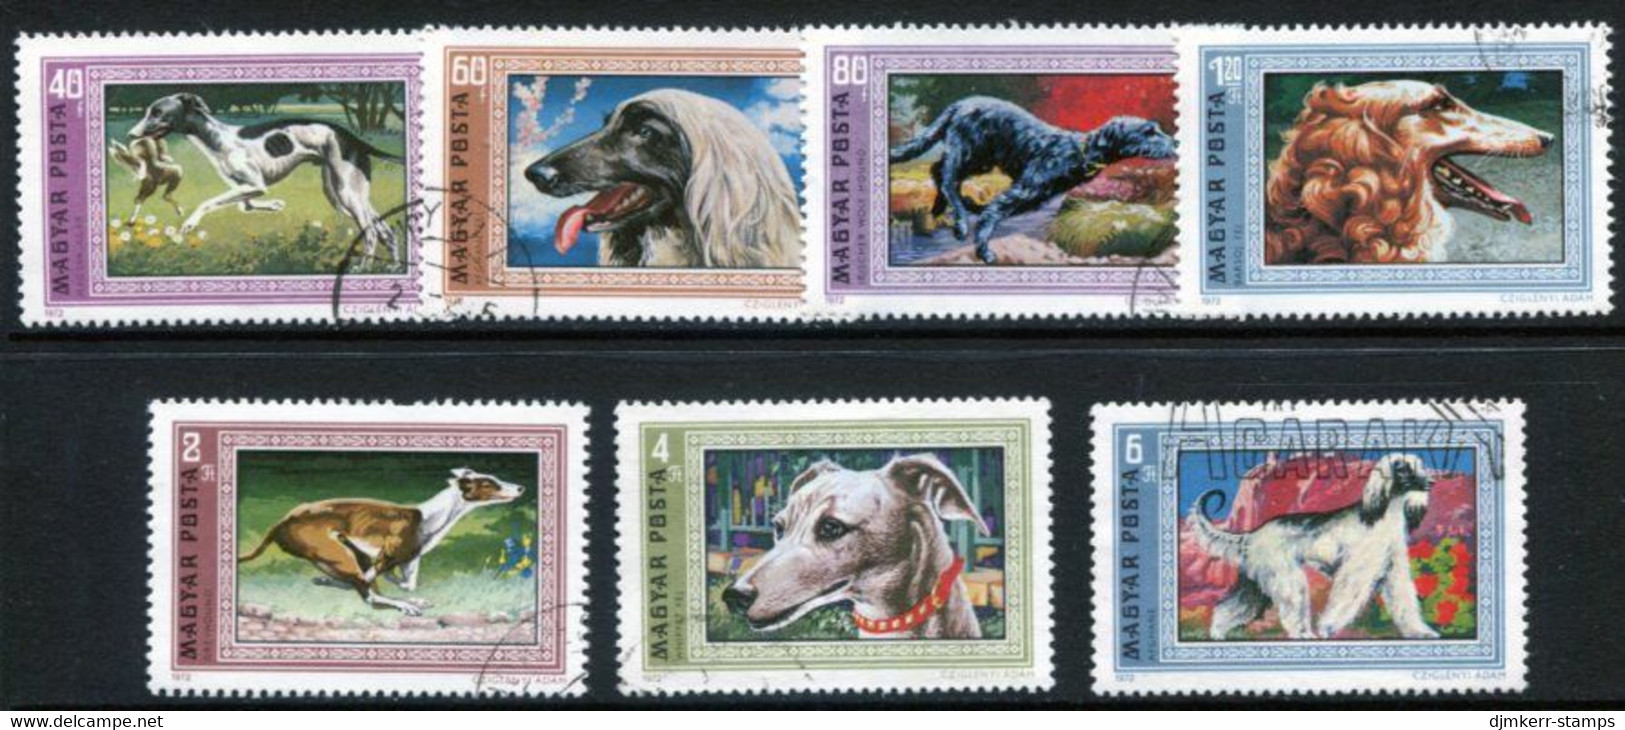 HUNGARY 1972 Greyhounds Used.  Michel 2742-48 - Used Stamps